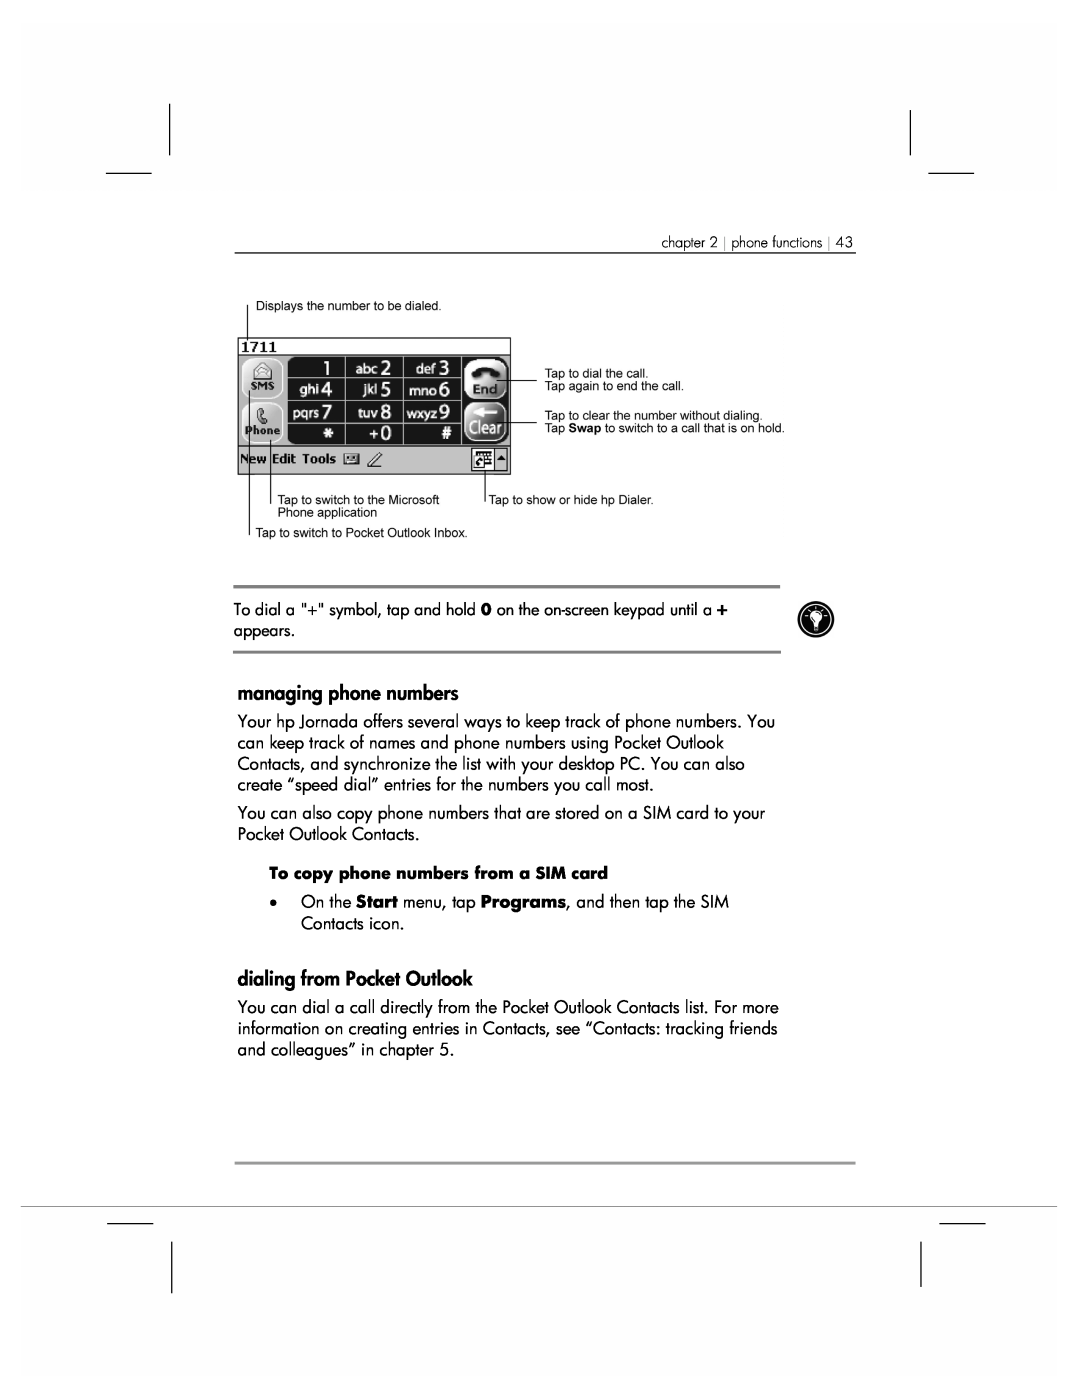 HP 920 manual managing phone numbers, dialing from Pocket Outlook 